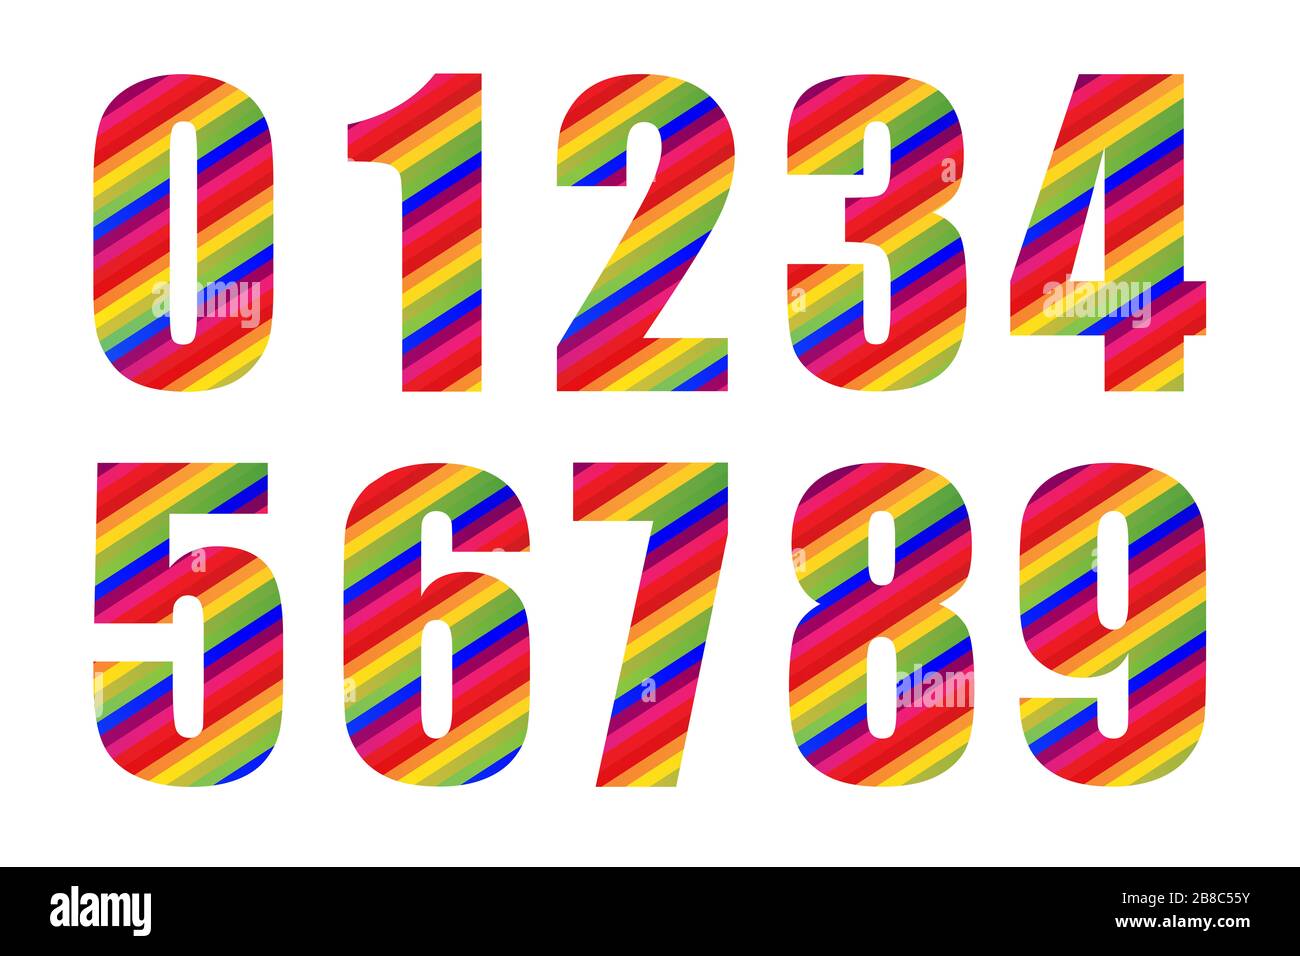 0, 1, 2, 3, 4, 5, 6, 7, 8, 9 Rainbow Numeral. Colorful Number Vector Illustration Design Isolated on White Background. Stock Photo